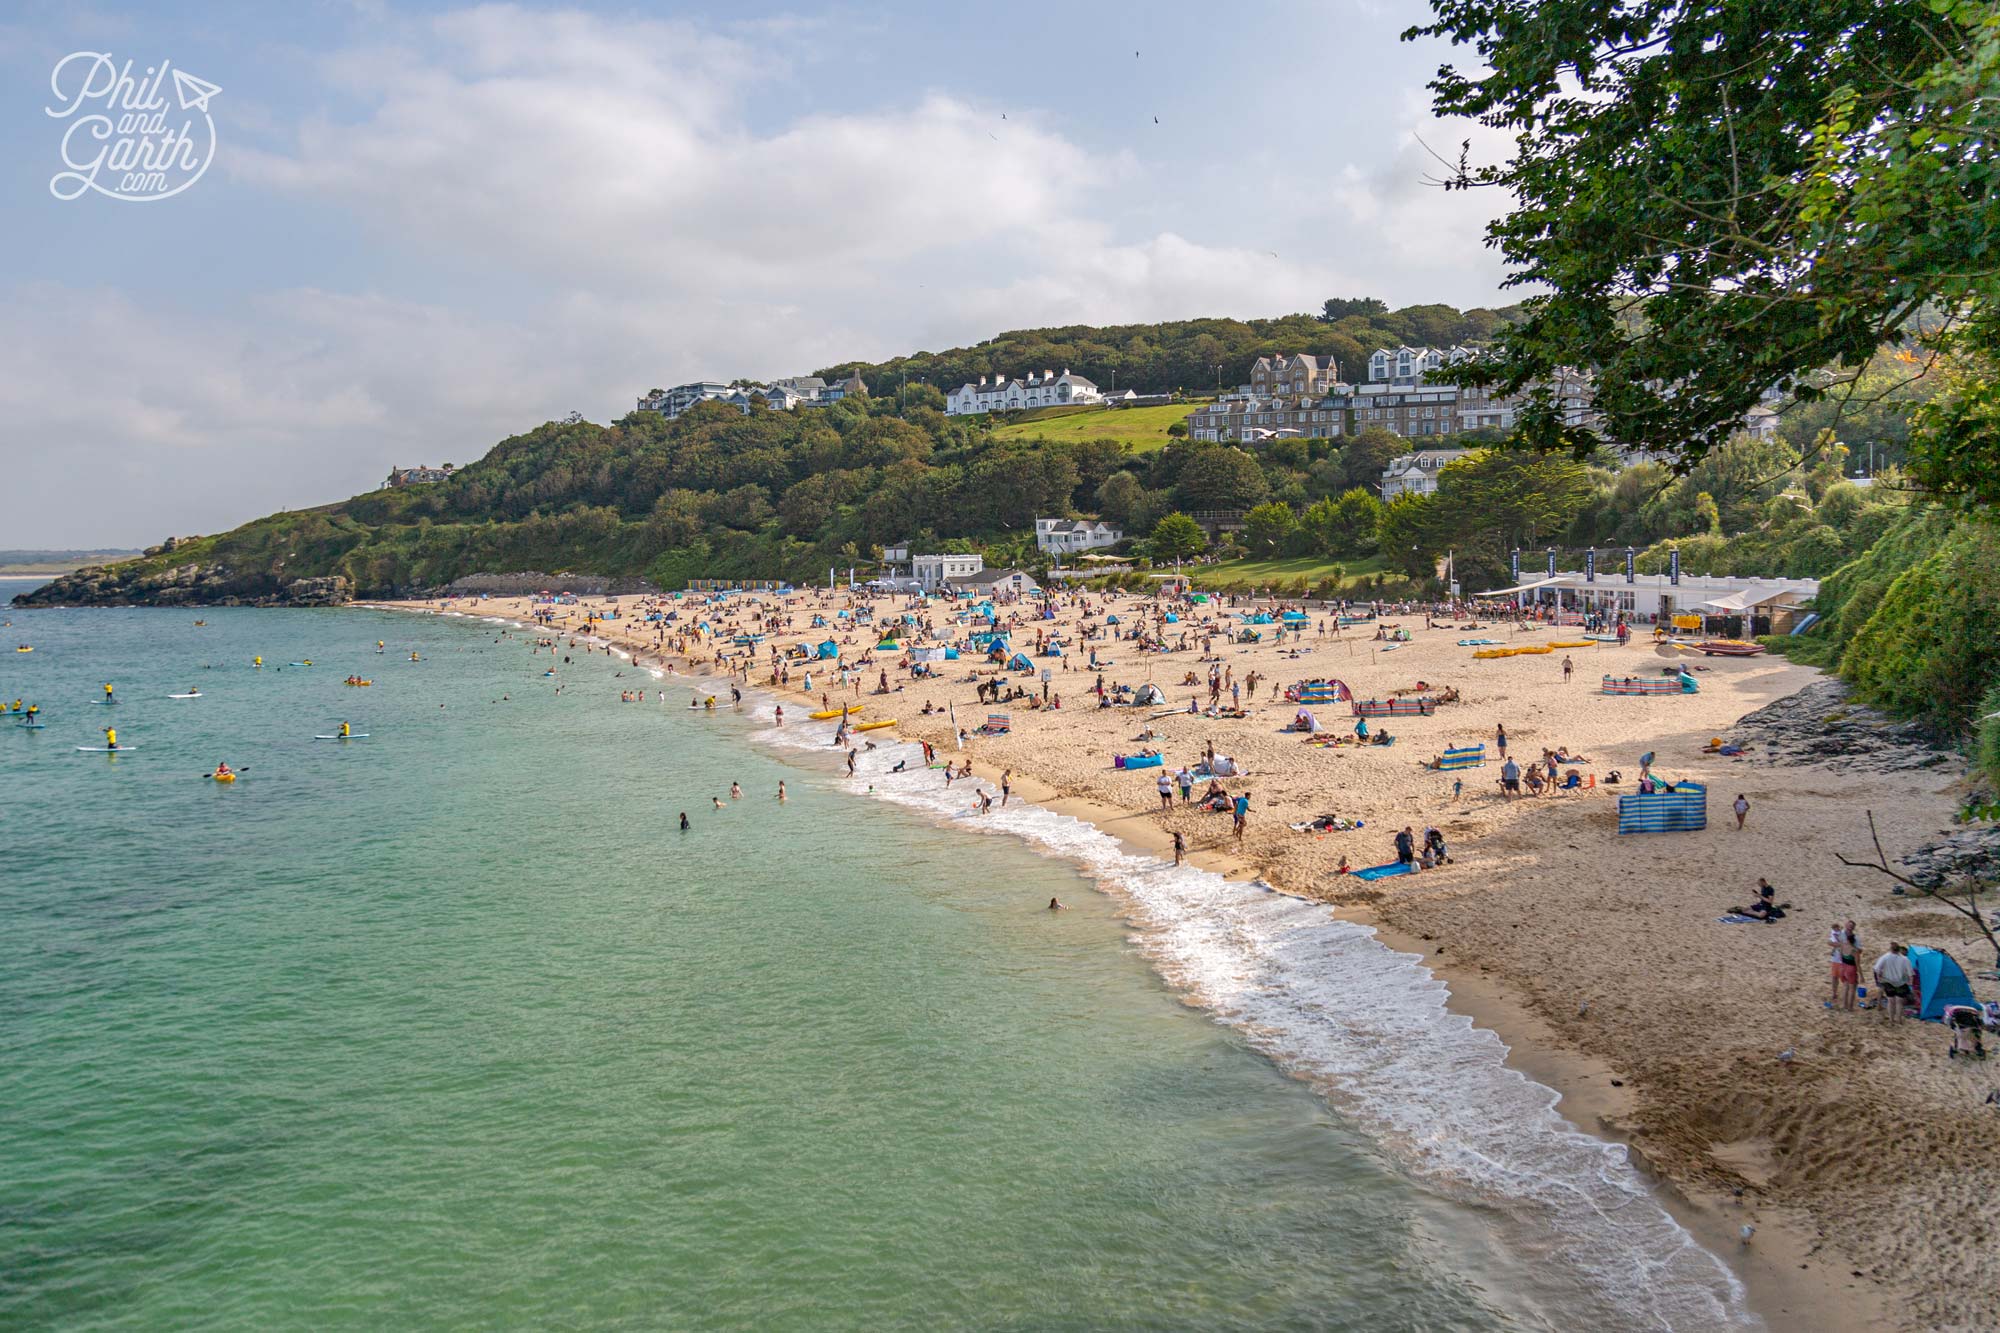 Porthminster Beach - another beautiful beach in St Ives Cornwall UK